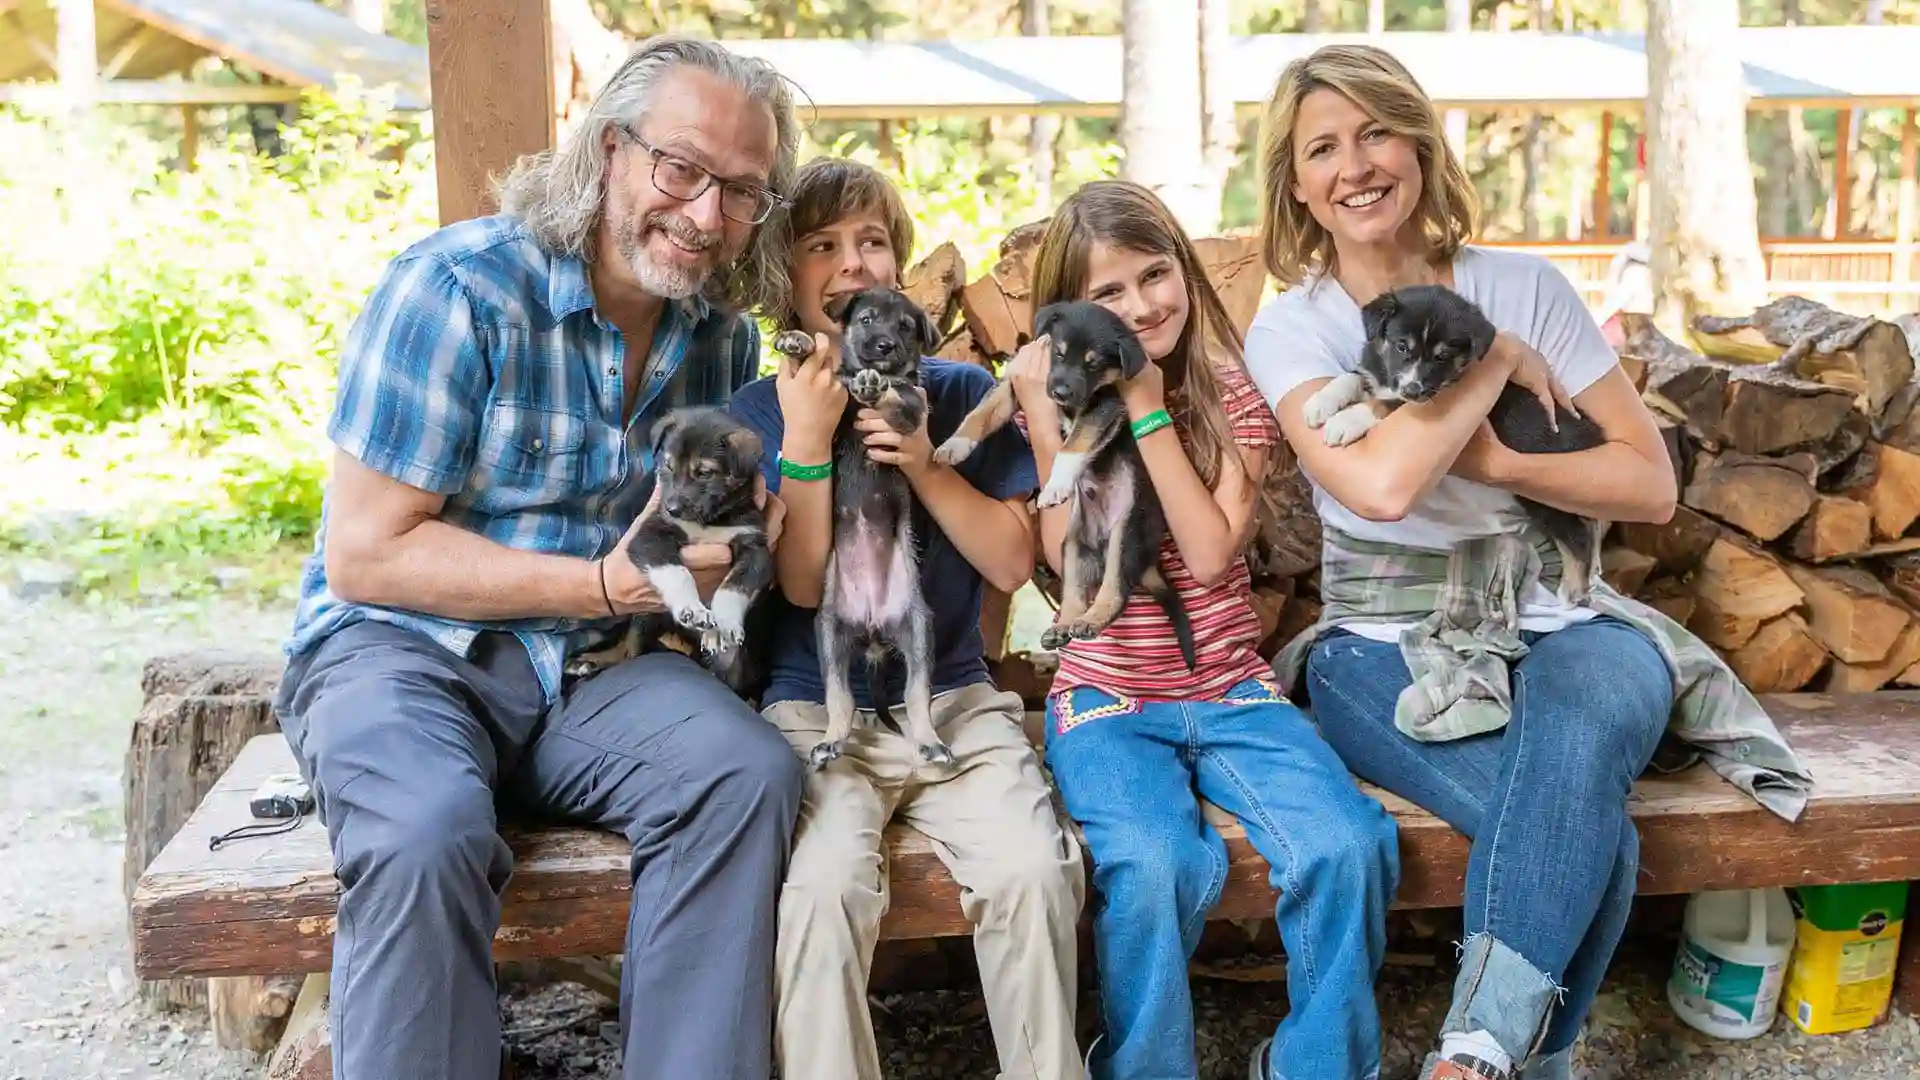 Travel expert Samantha Brown with family holding puppies in Alaska.